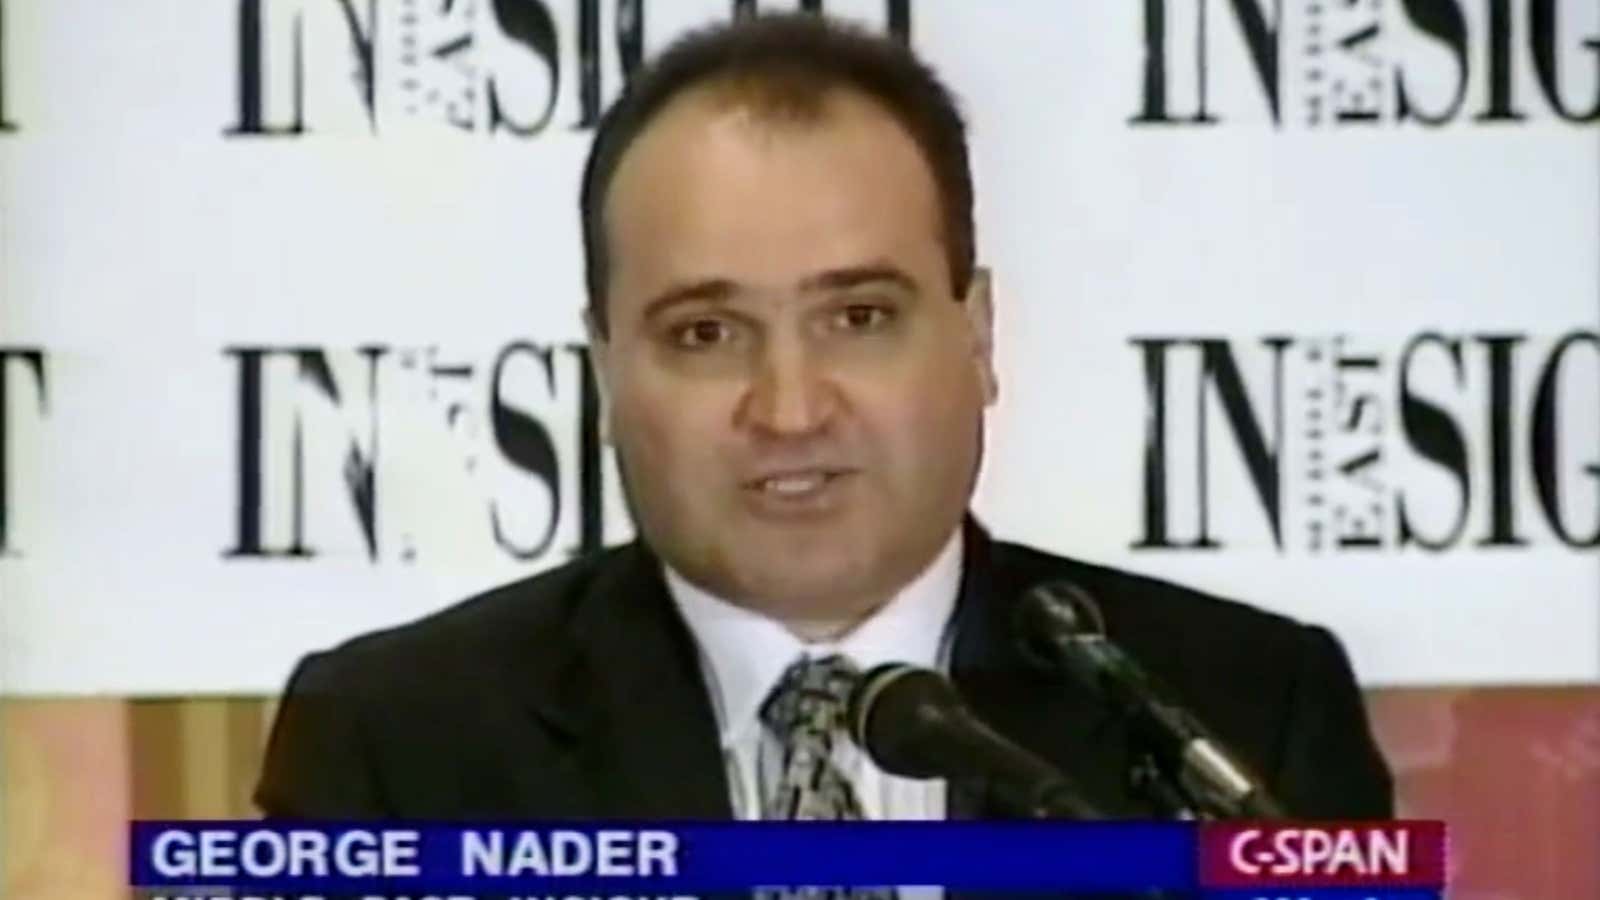 Nader, a convicted pedophile, had been lobbying Trump for Saudi Arabia and the UAE